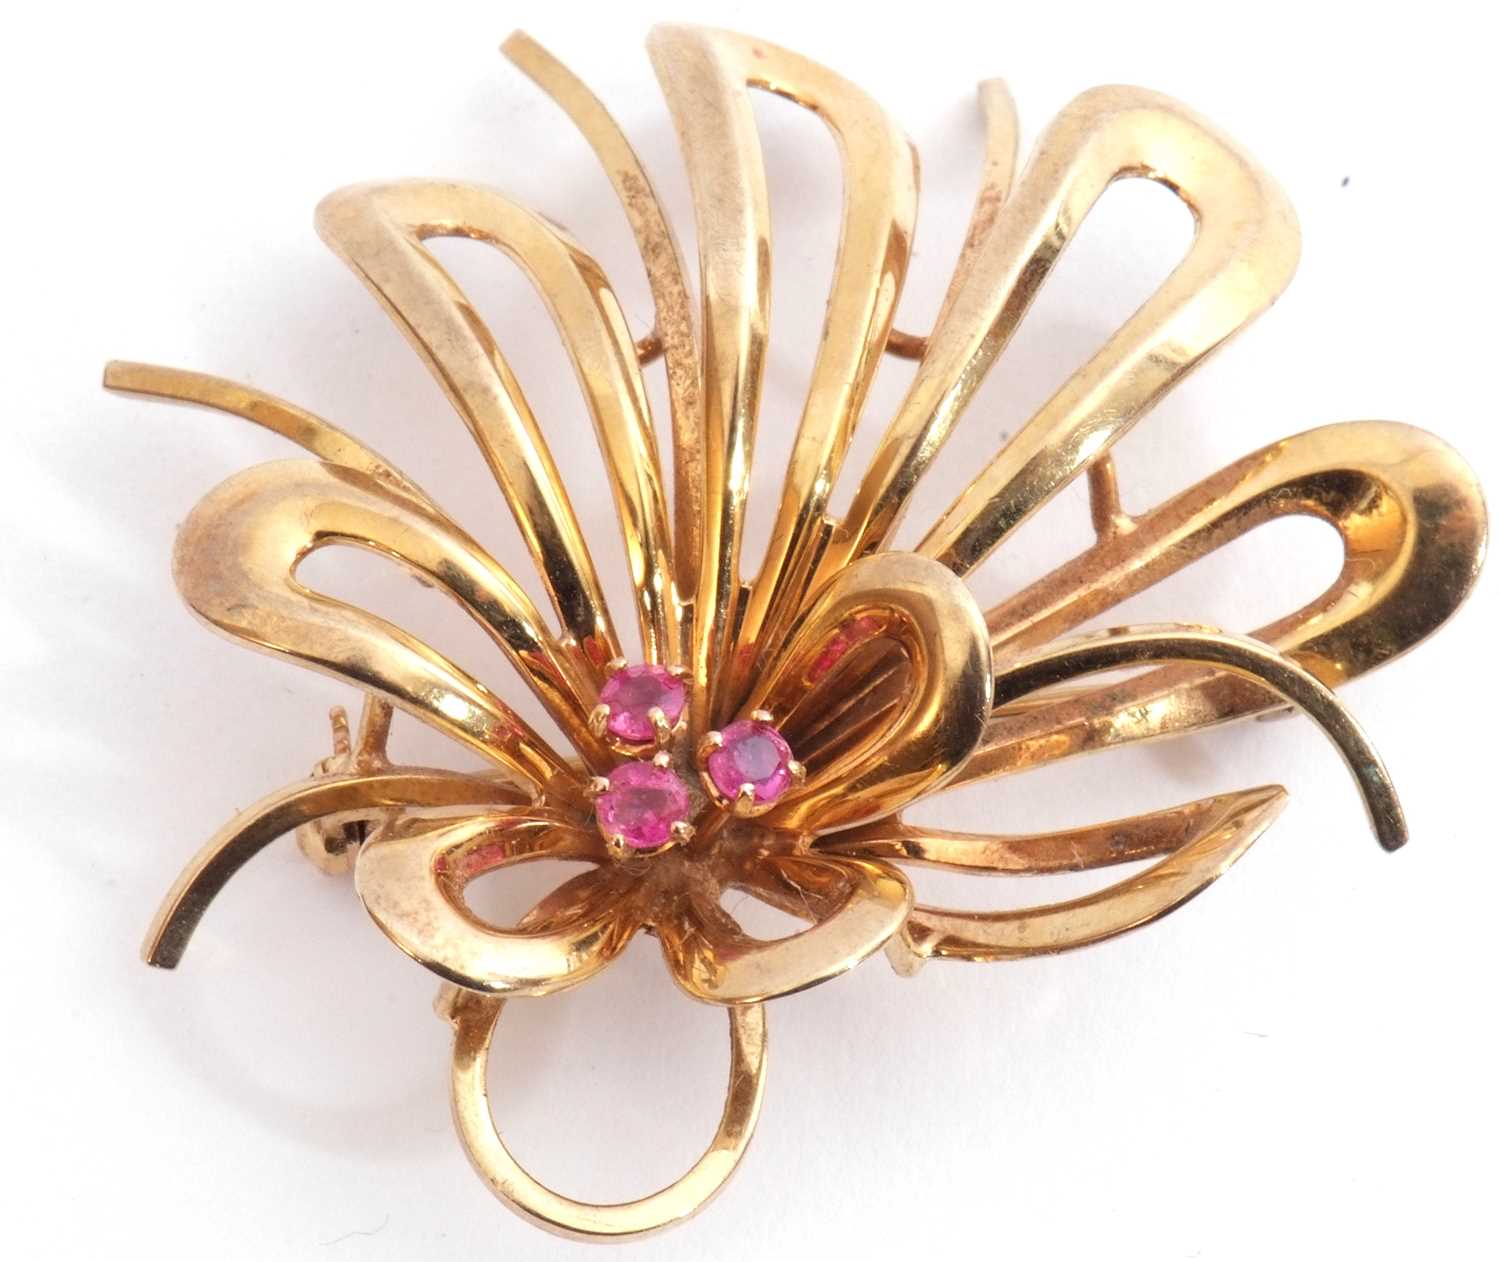 9ct gold and ruby spray brooch, open work design highlighted with three small round rubies, 7gms g/ - Image 2 of 5